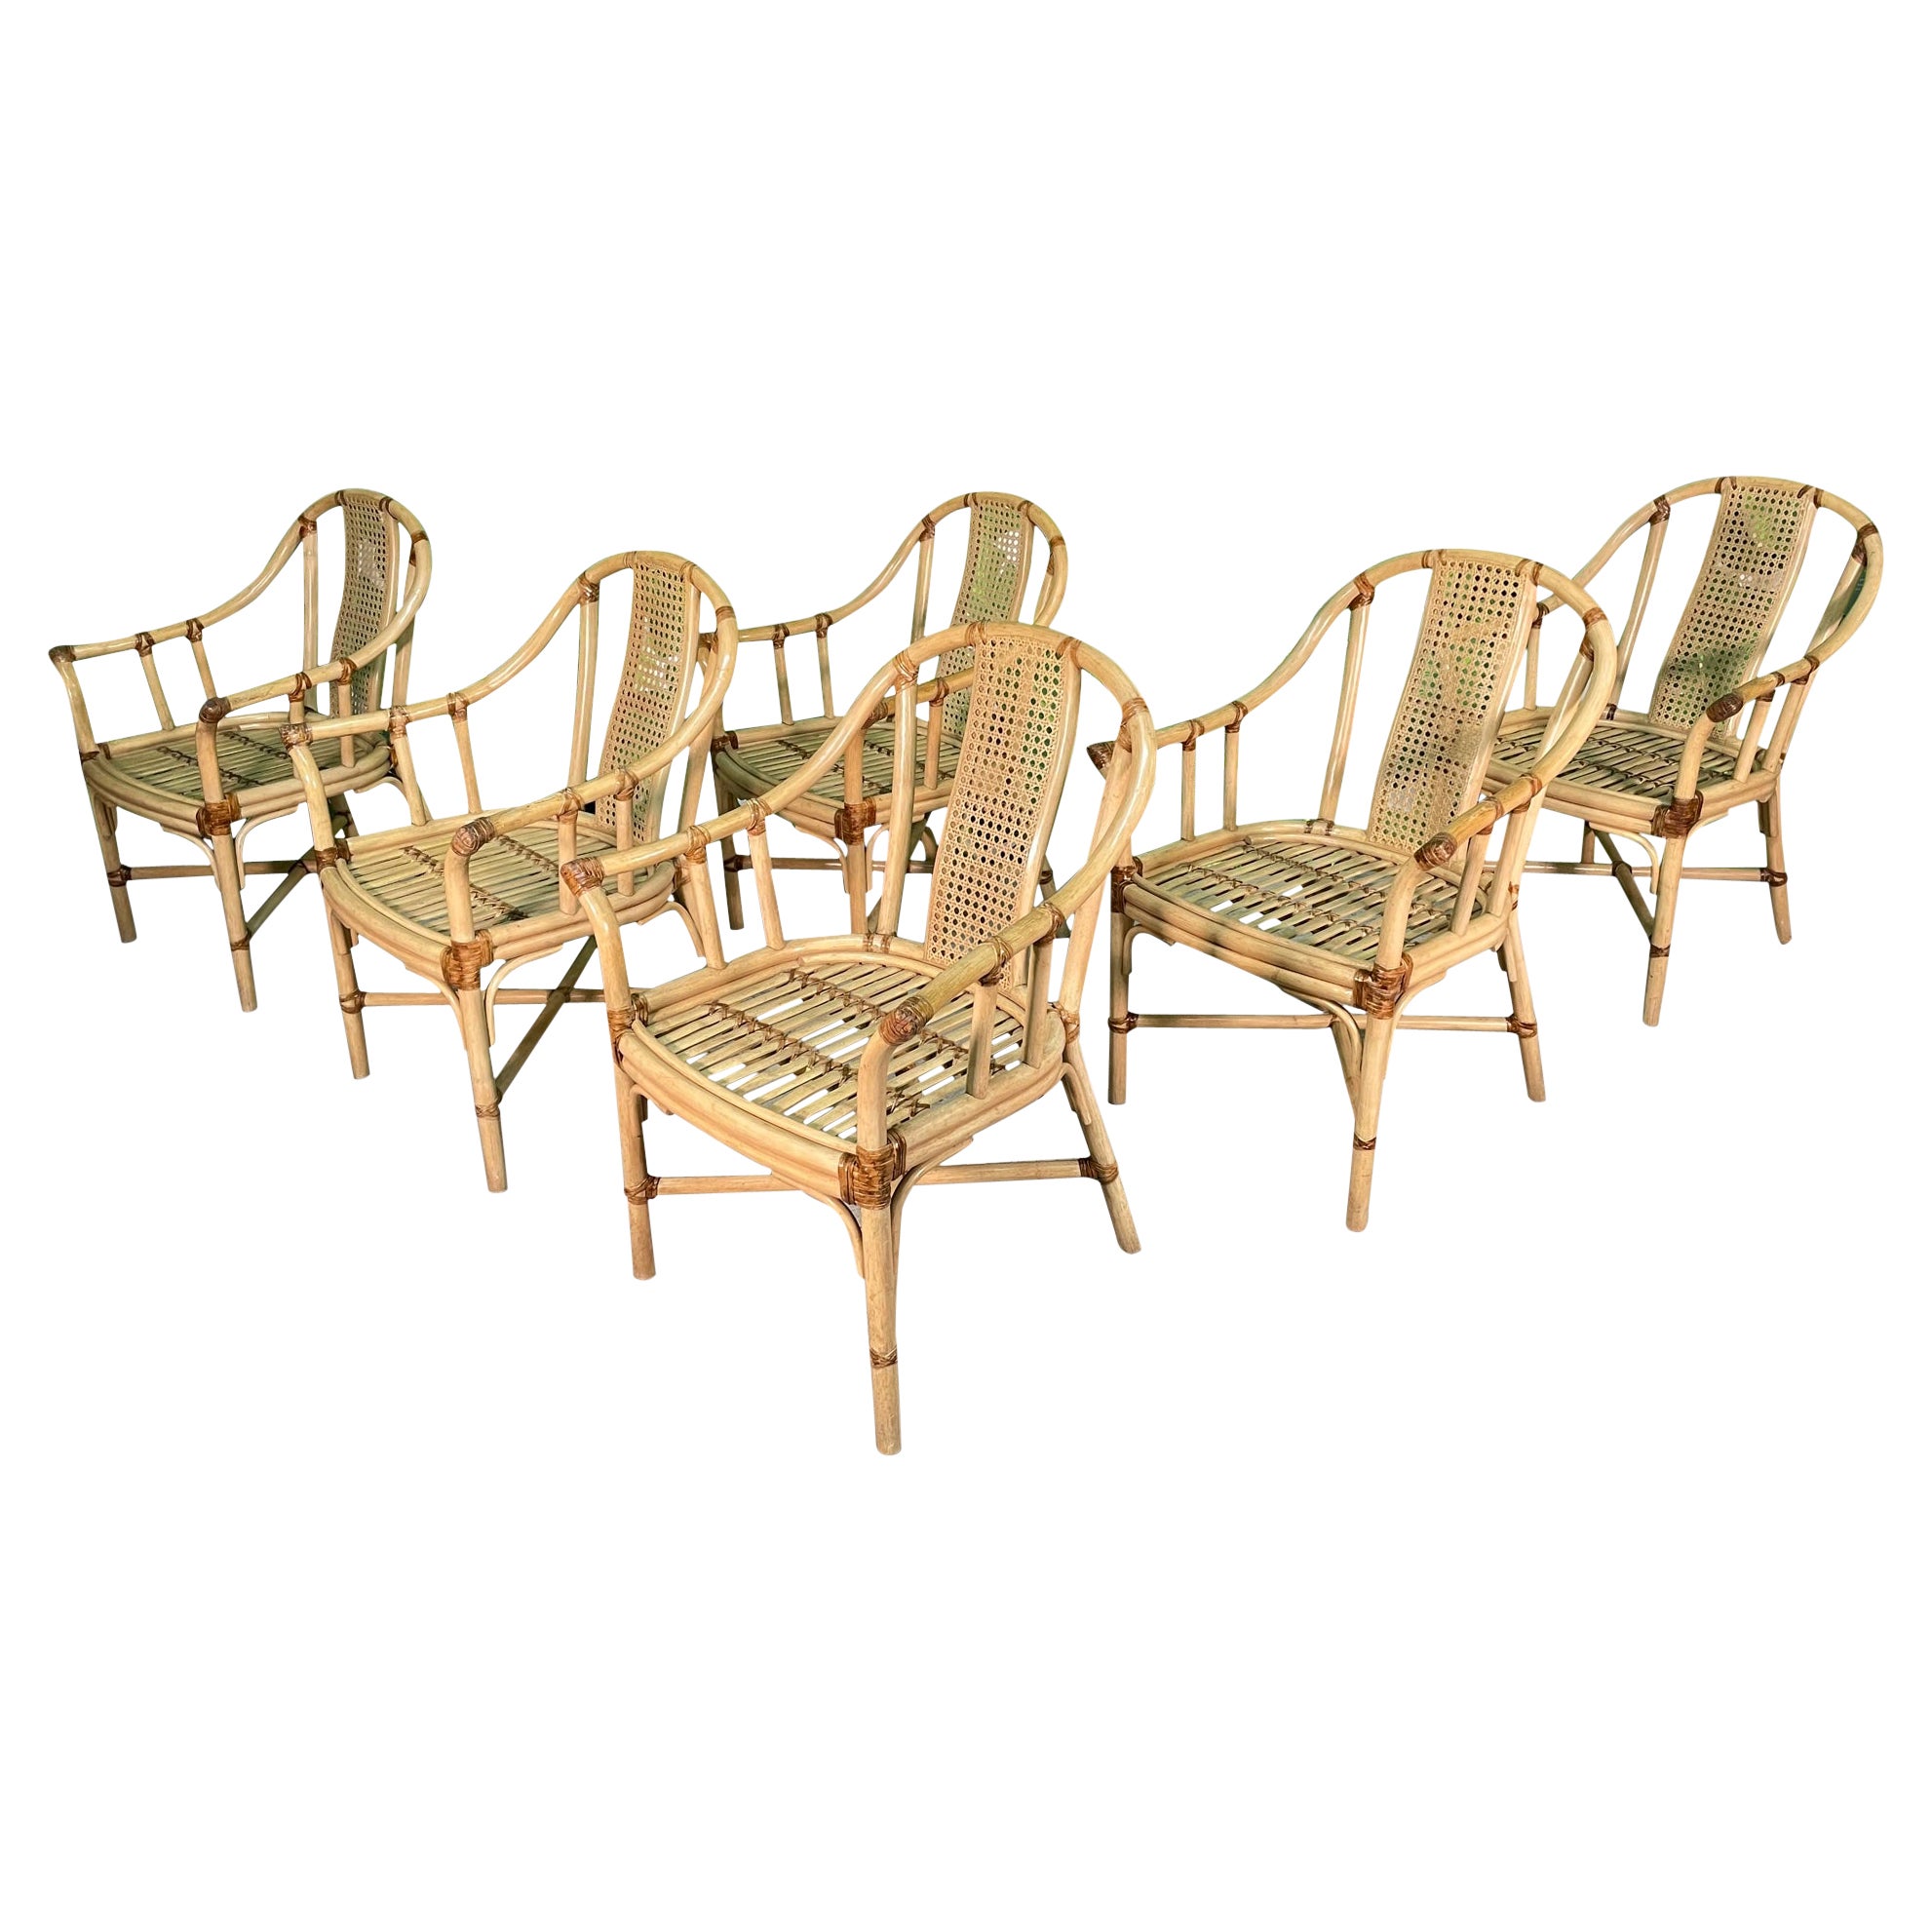 Bamboo Rattan Dining Chairs by Drexel Heritage, Set of 6